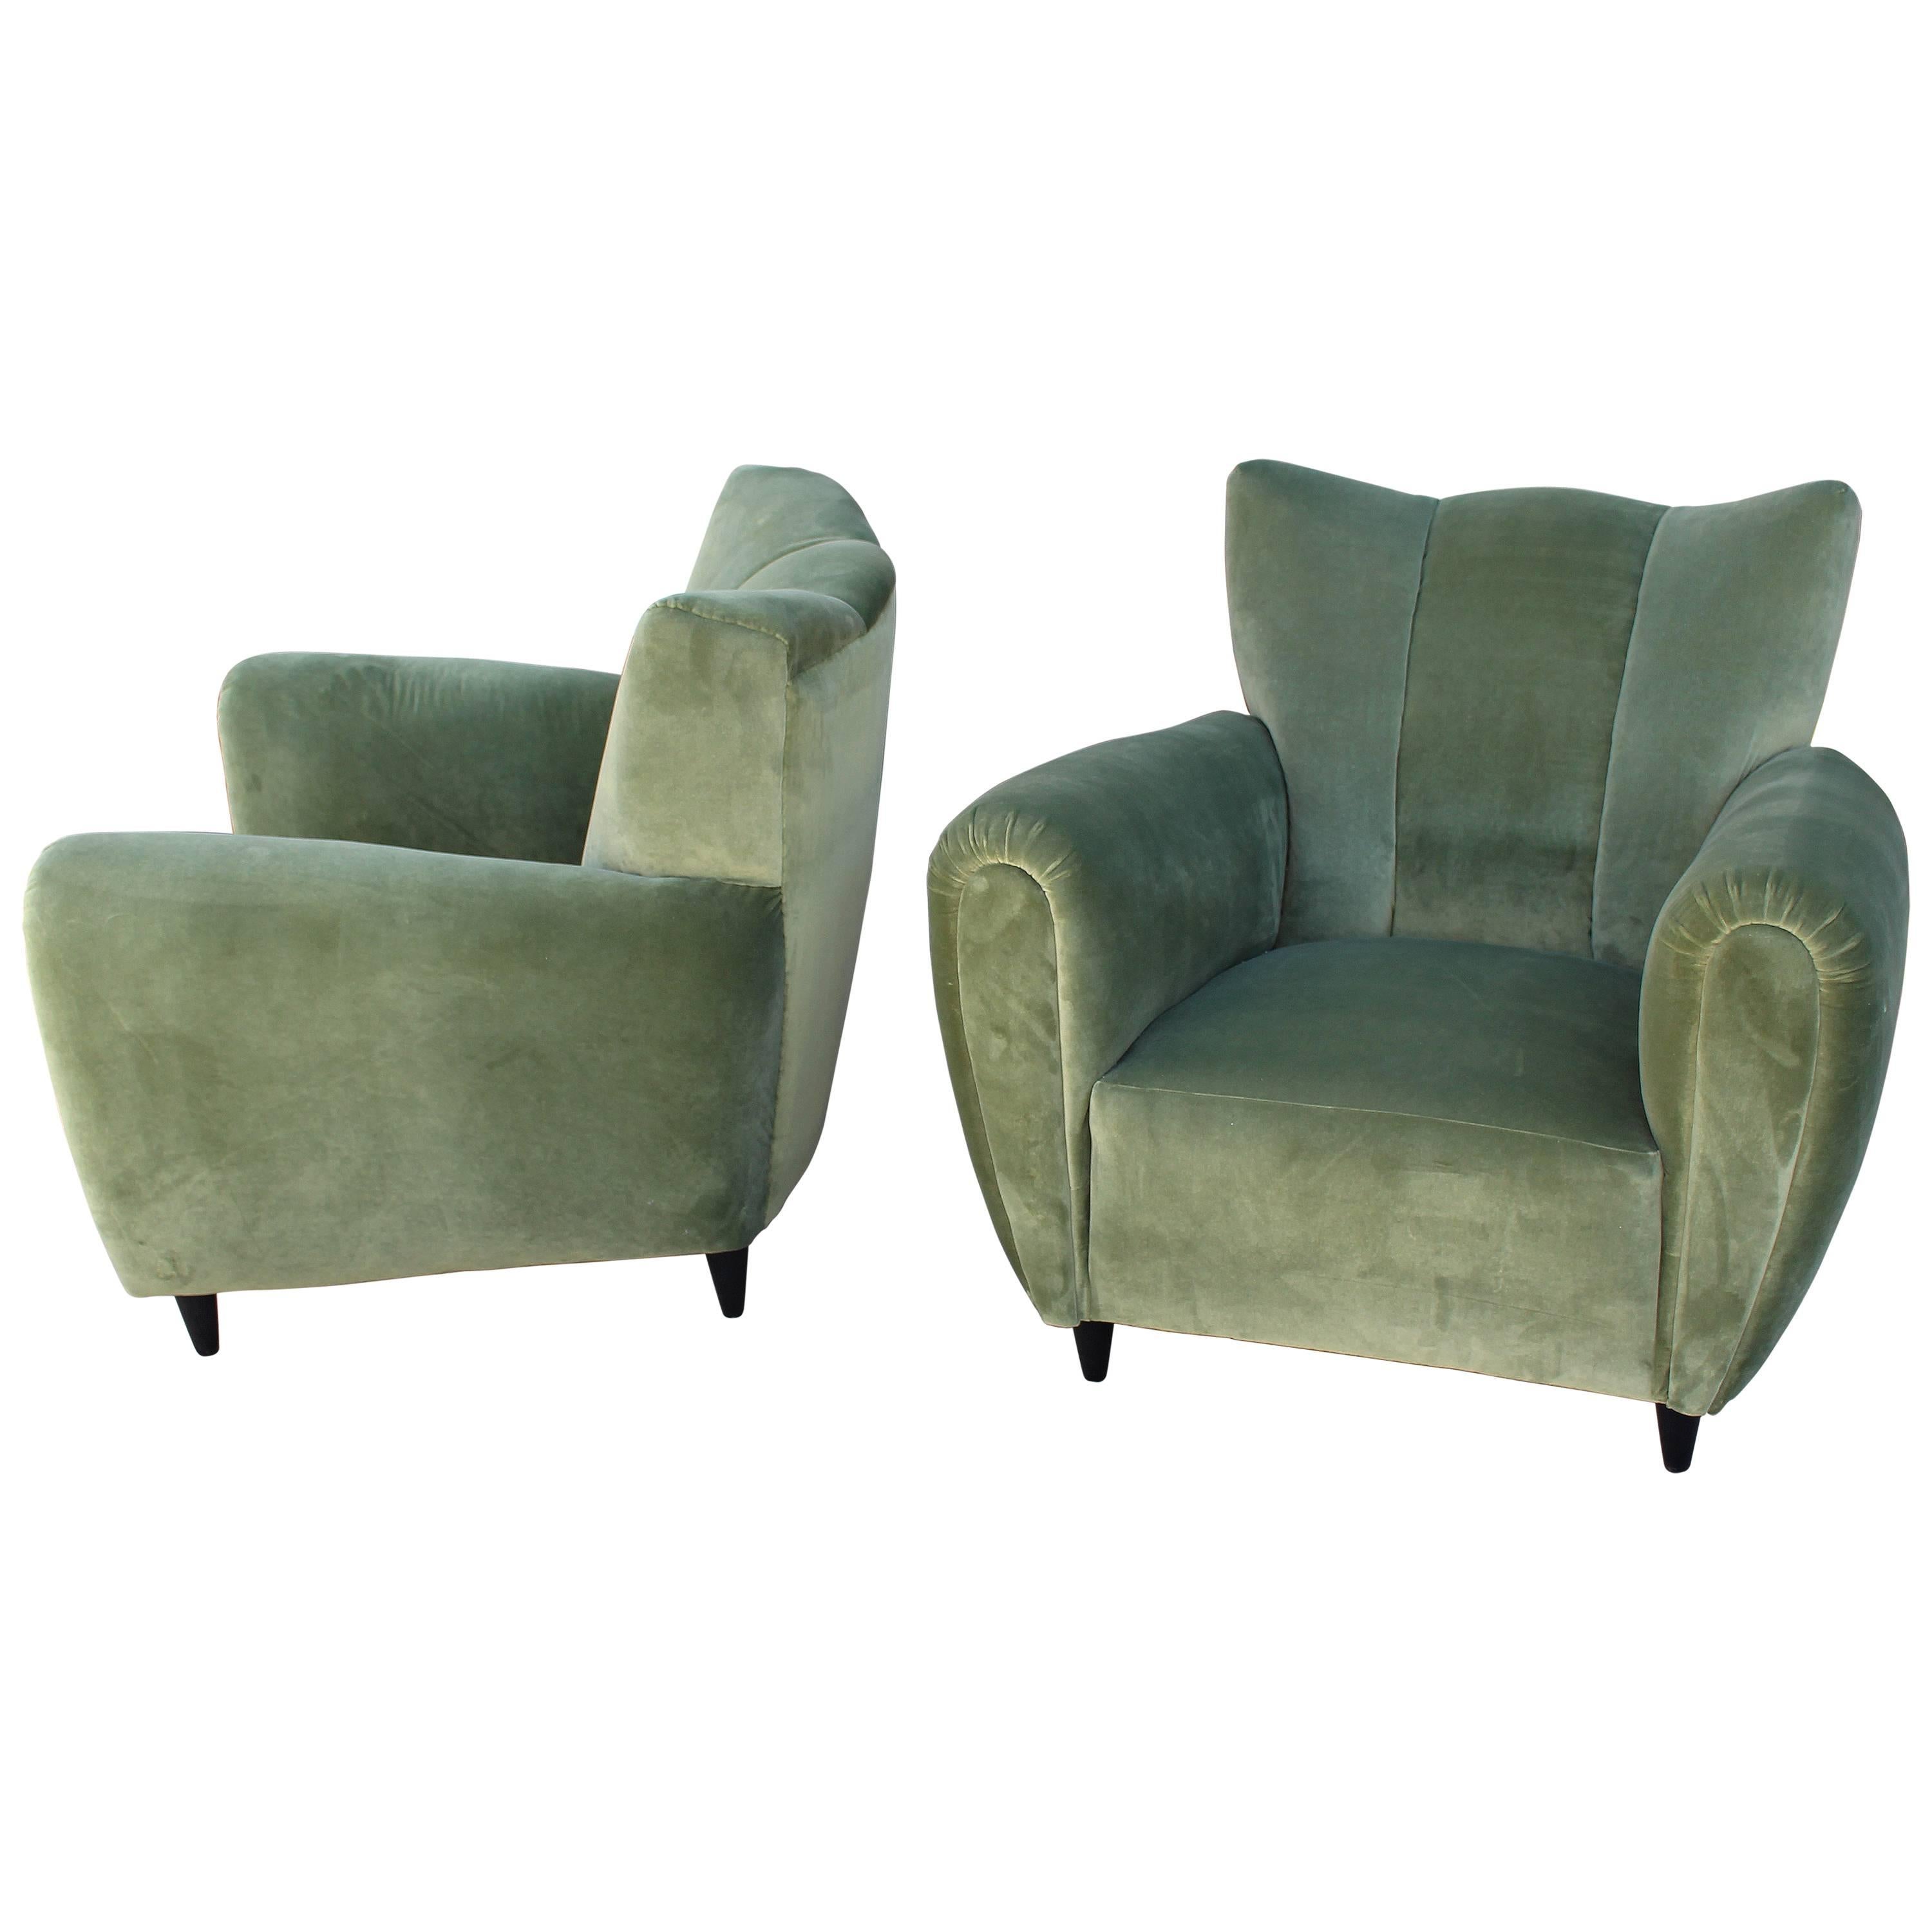 Italian Pair of Chairs Attributed to Guglielmo Ulrich, 1930s